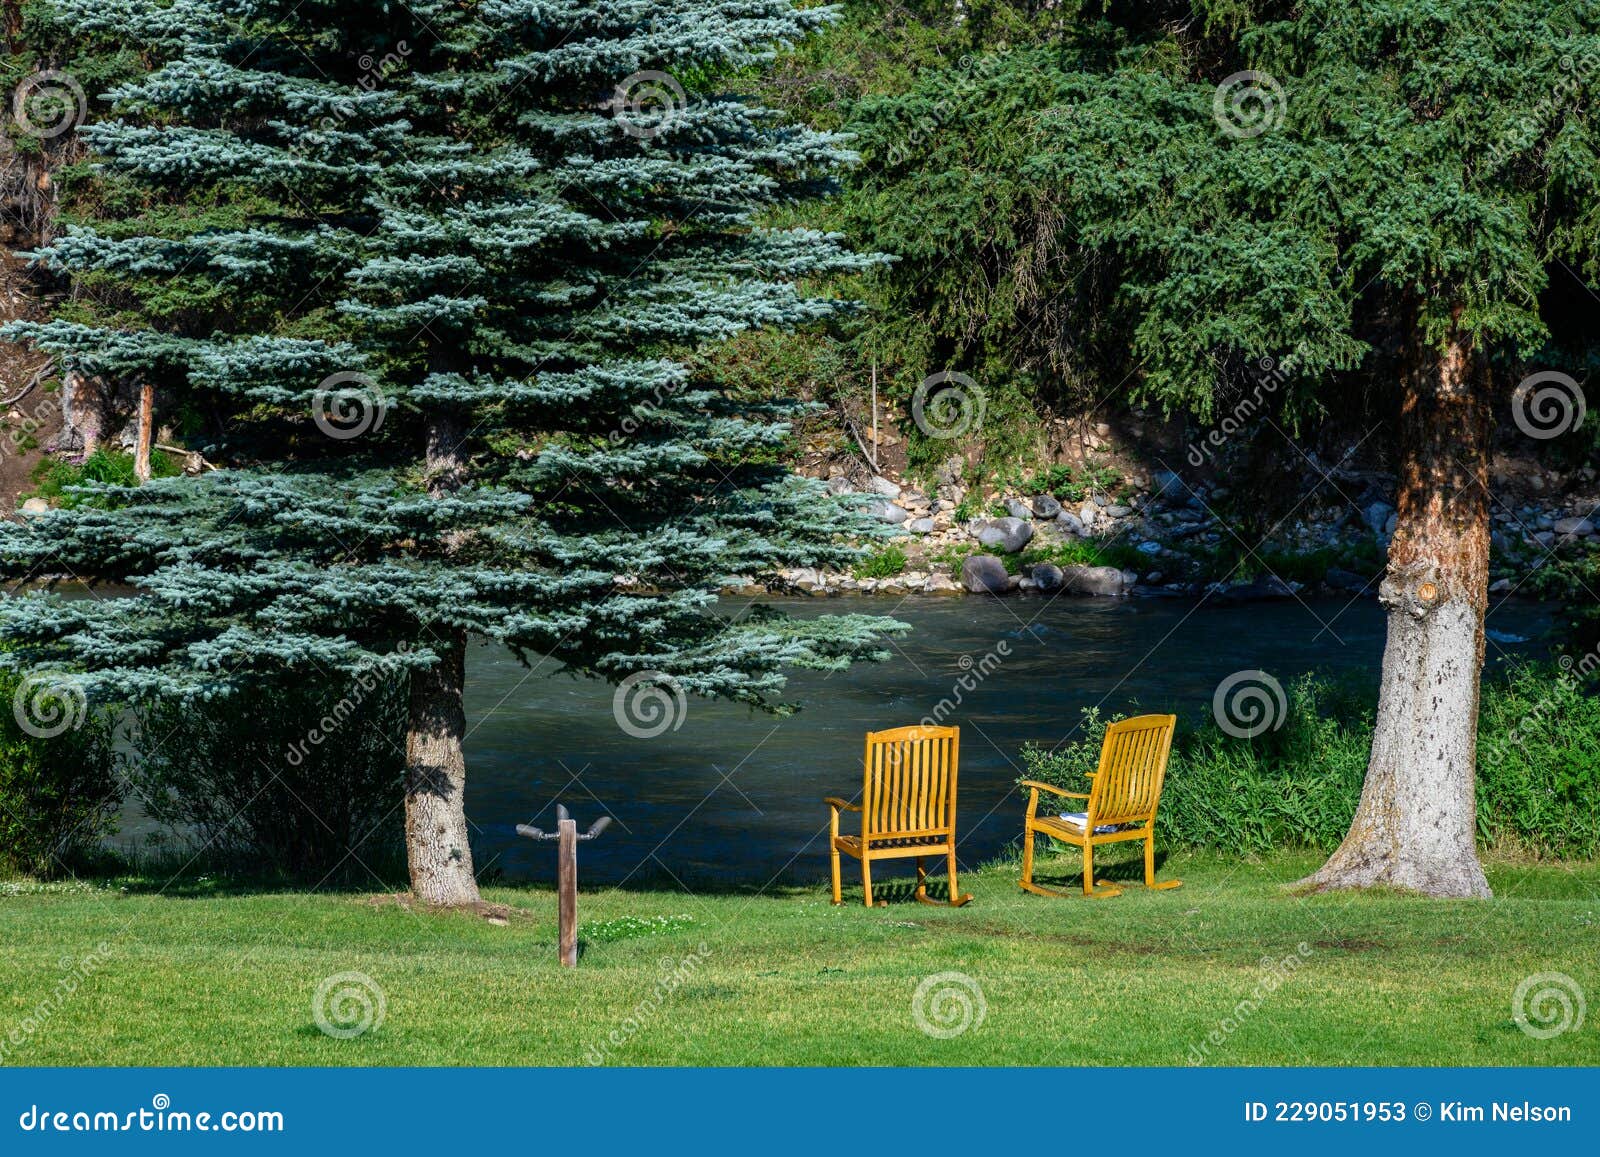 pair of wooden rocking chairs on a green lawn at the edge of the gallatin river